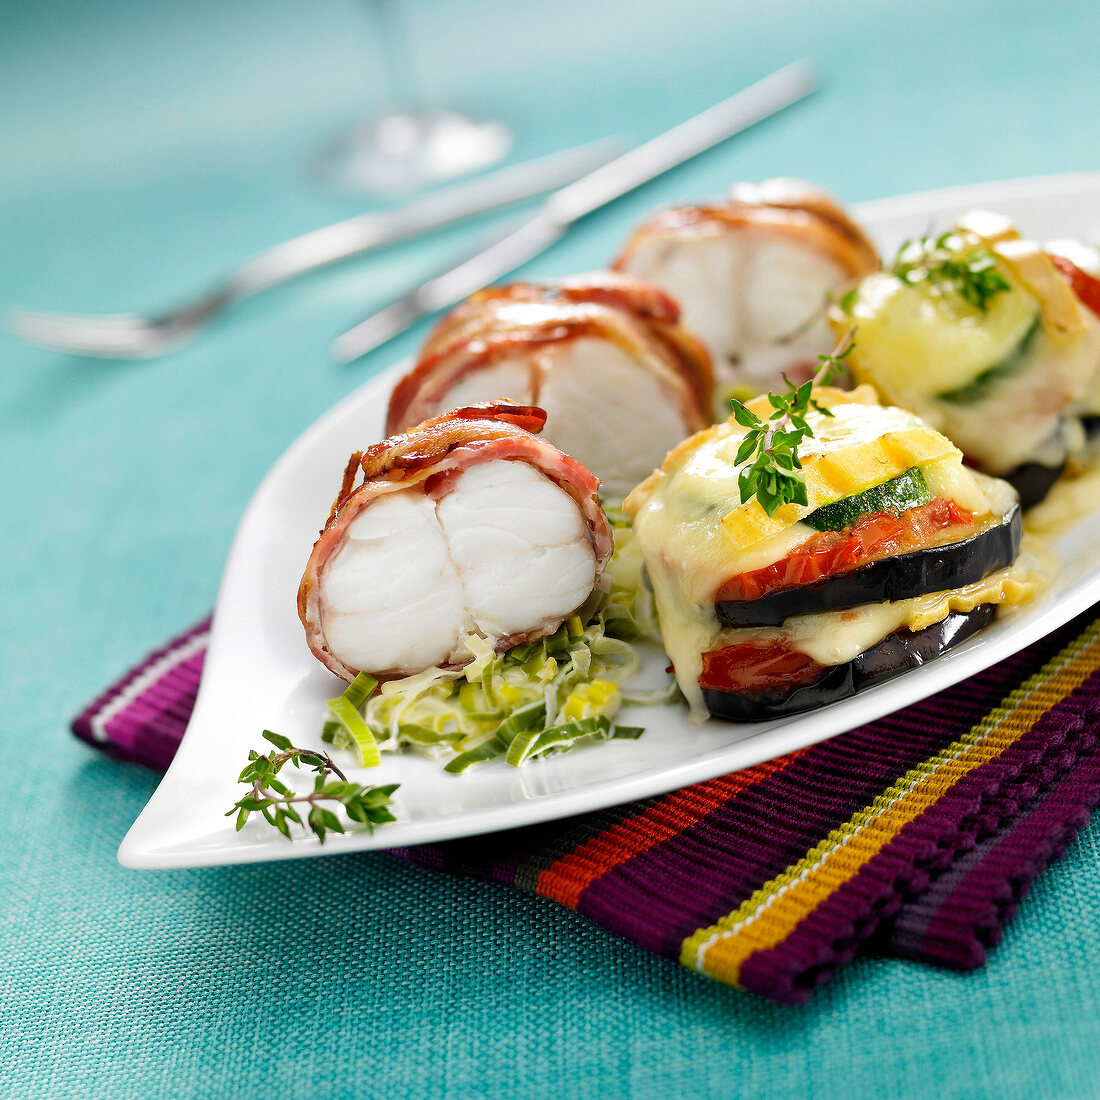 Monkfish wrapped in bacon with slowly cooked leeks,vegetable and Saint-Nectaire tian